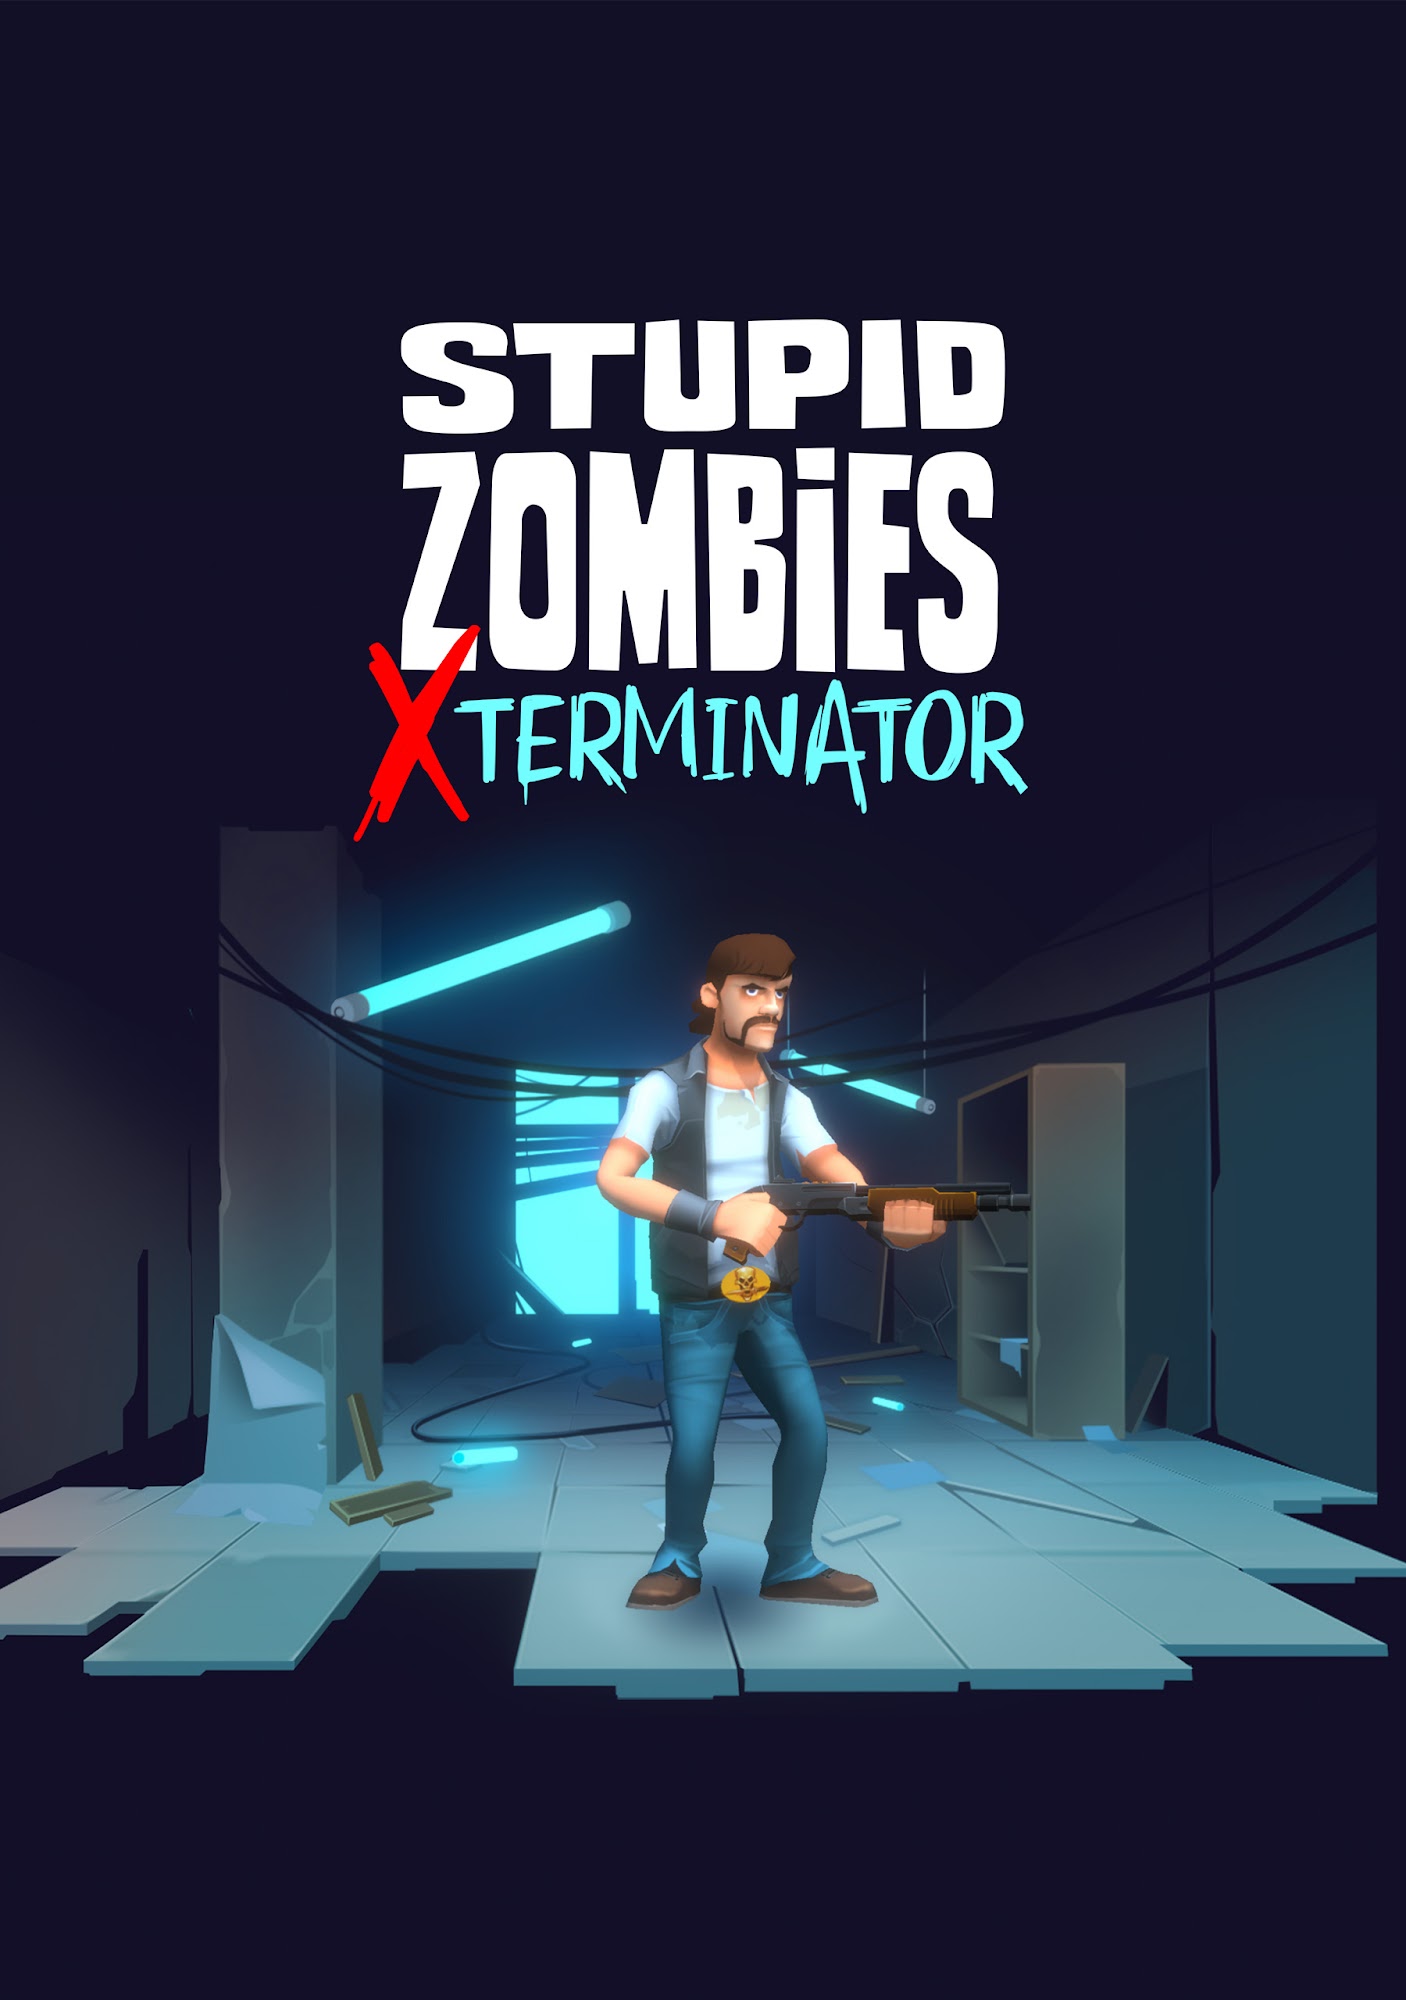 Full version of Android Zombie shooters game apk Stupid Zombies Exterminator for tablet and phone.